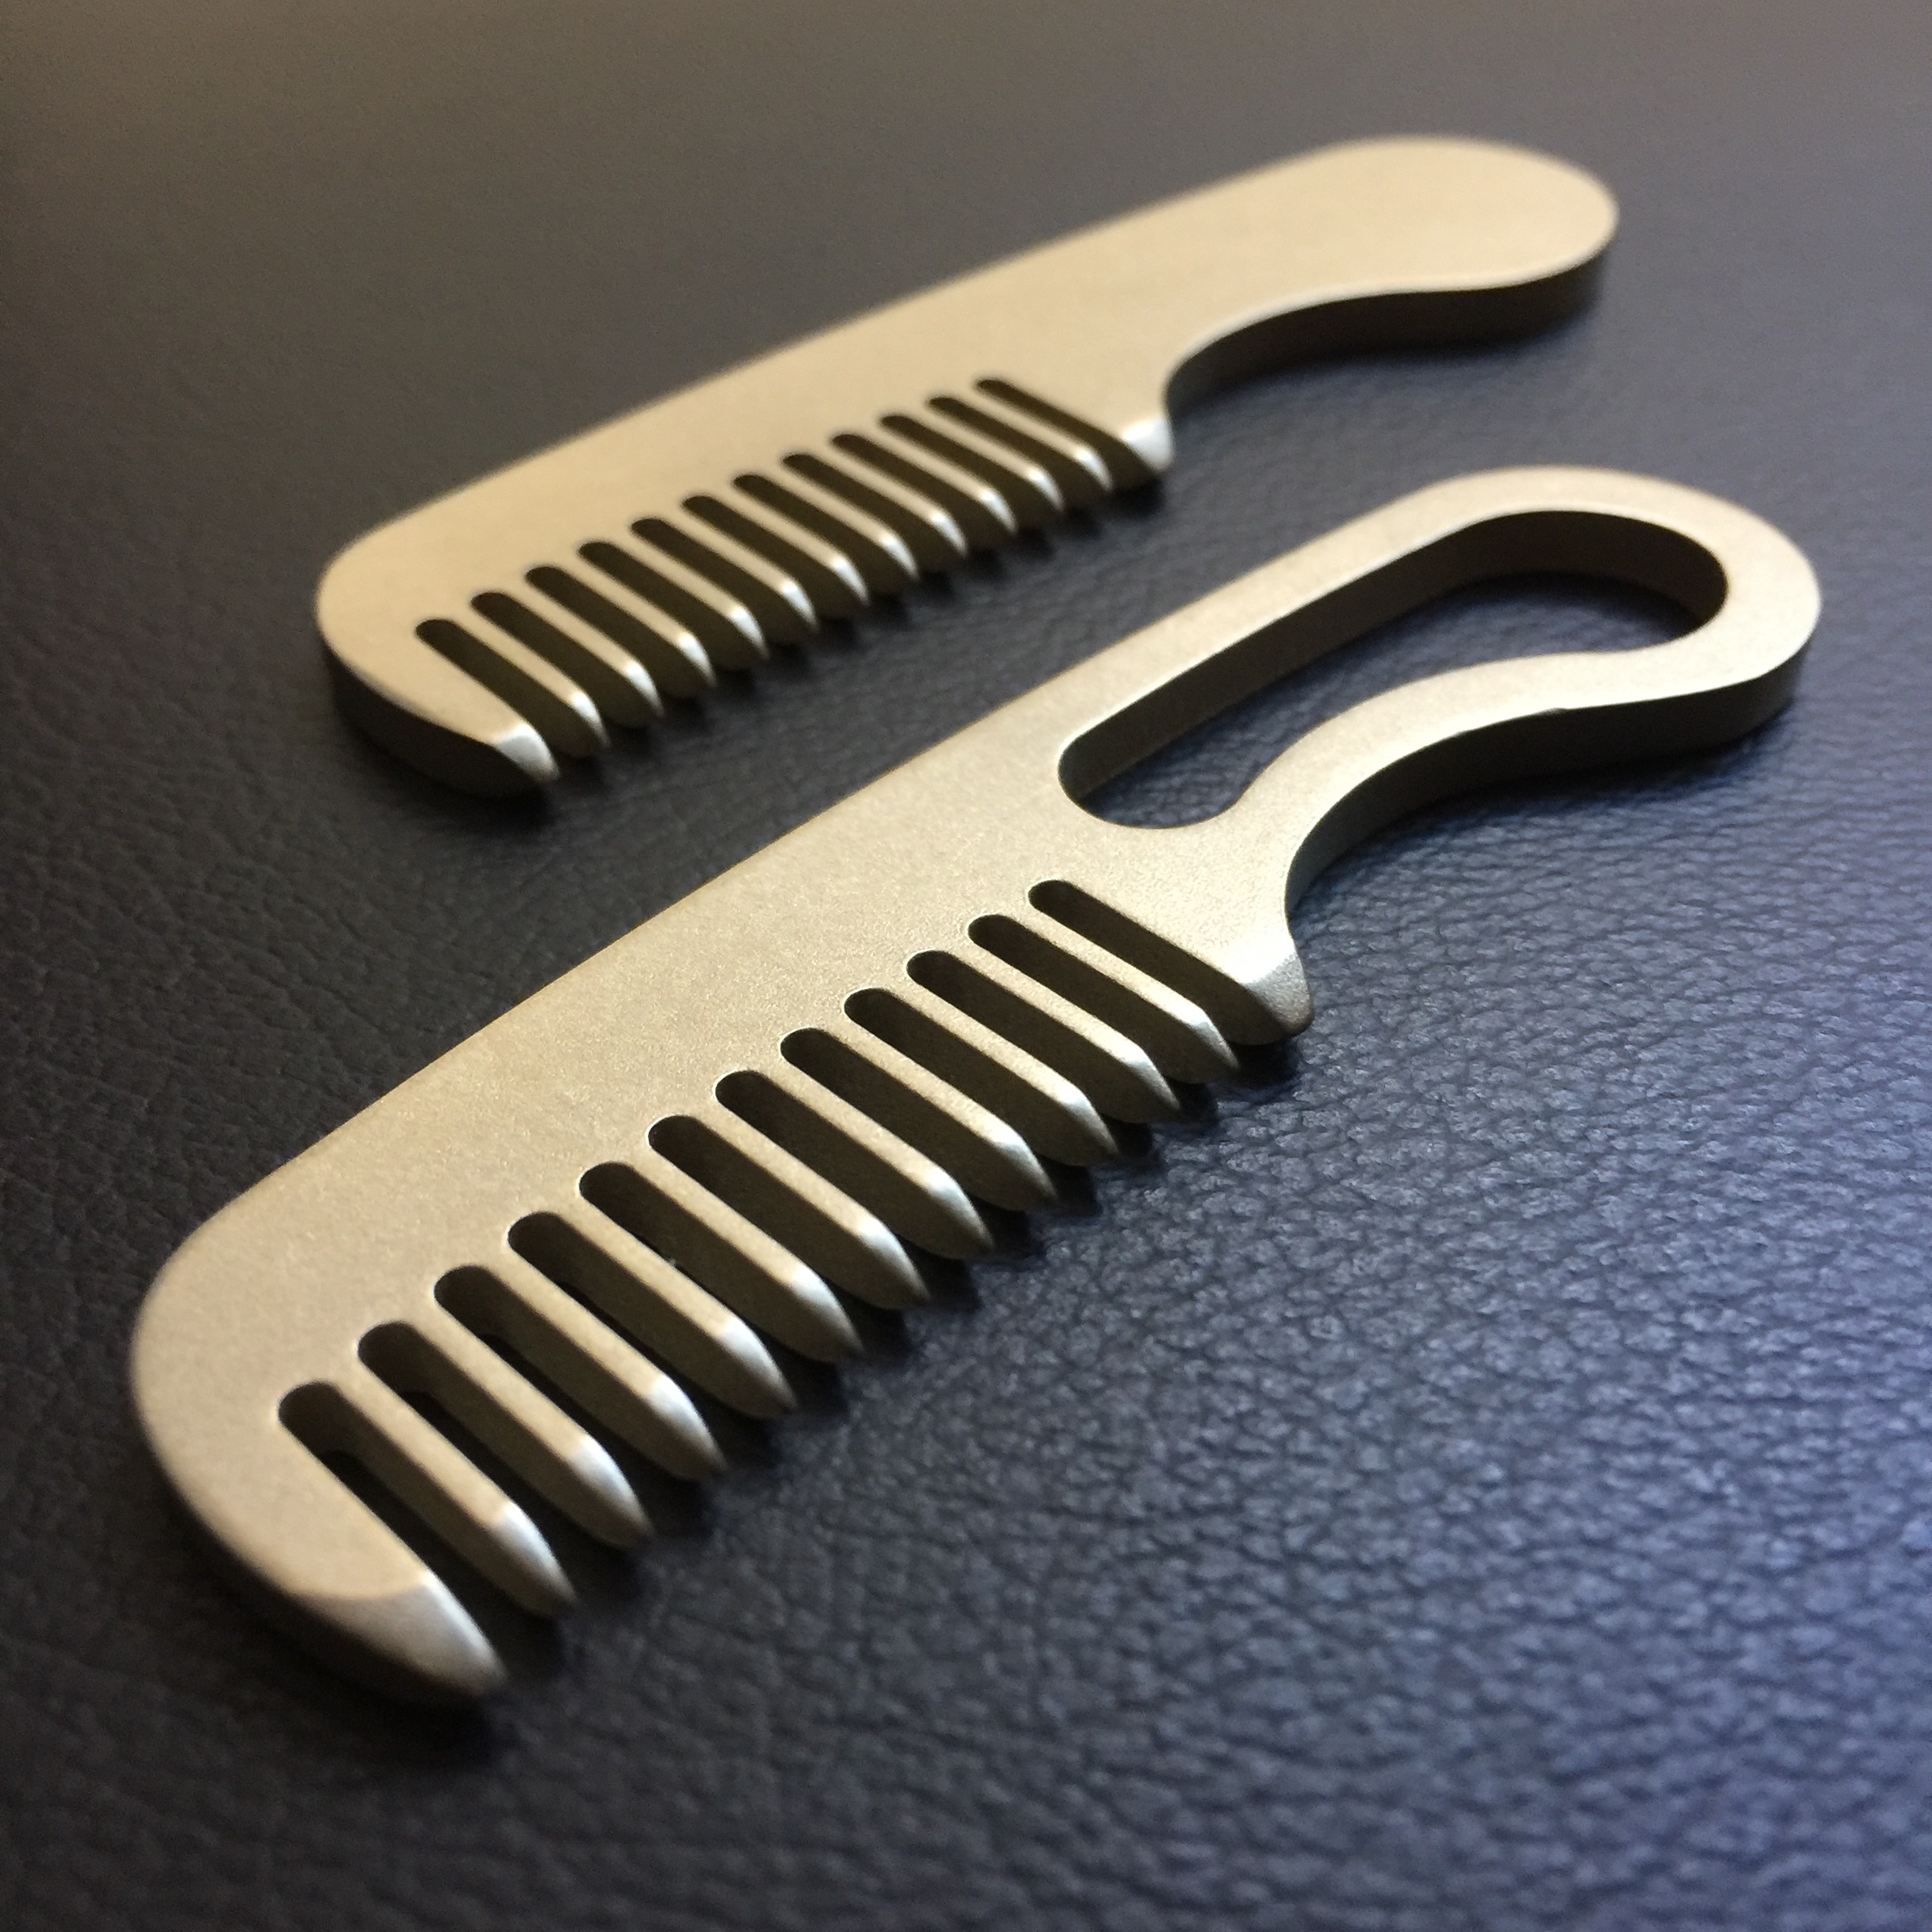 Duster - Brass / Stainless Steel / Titanium — Metal Comb Works